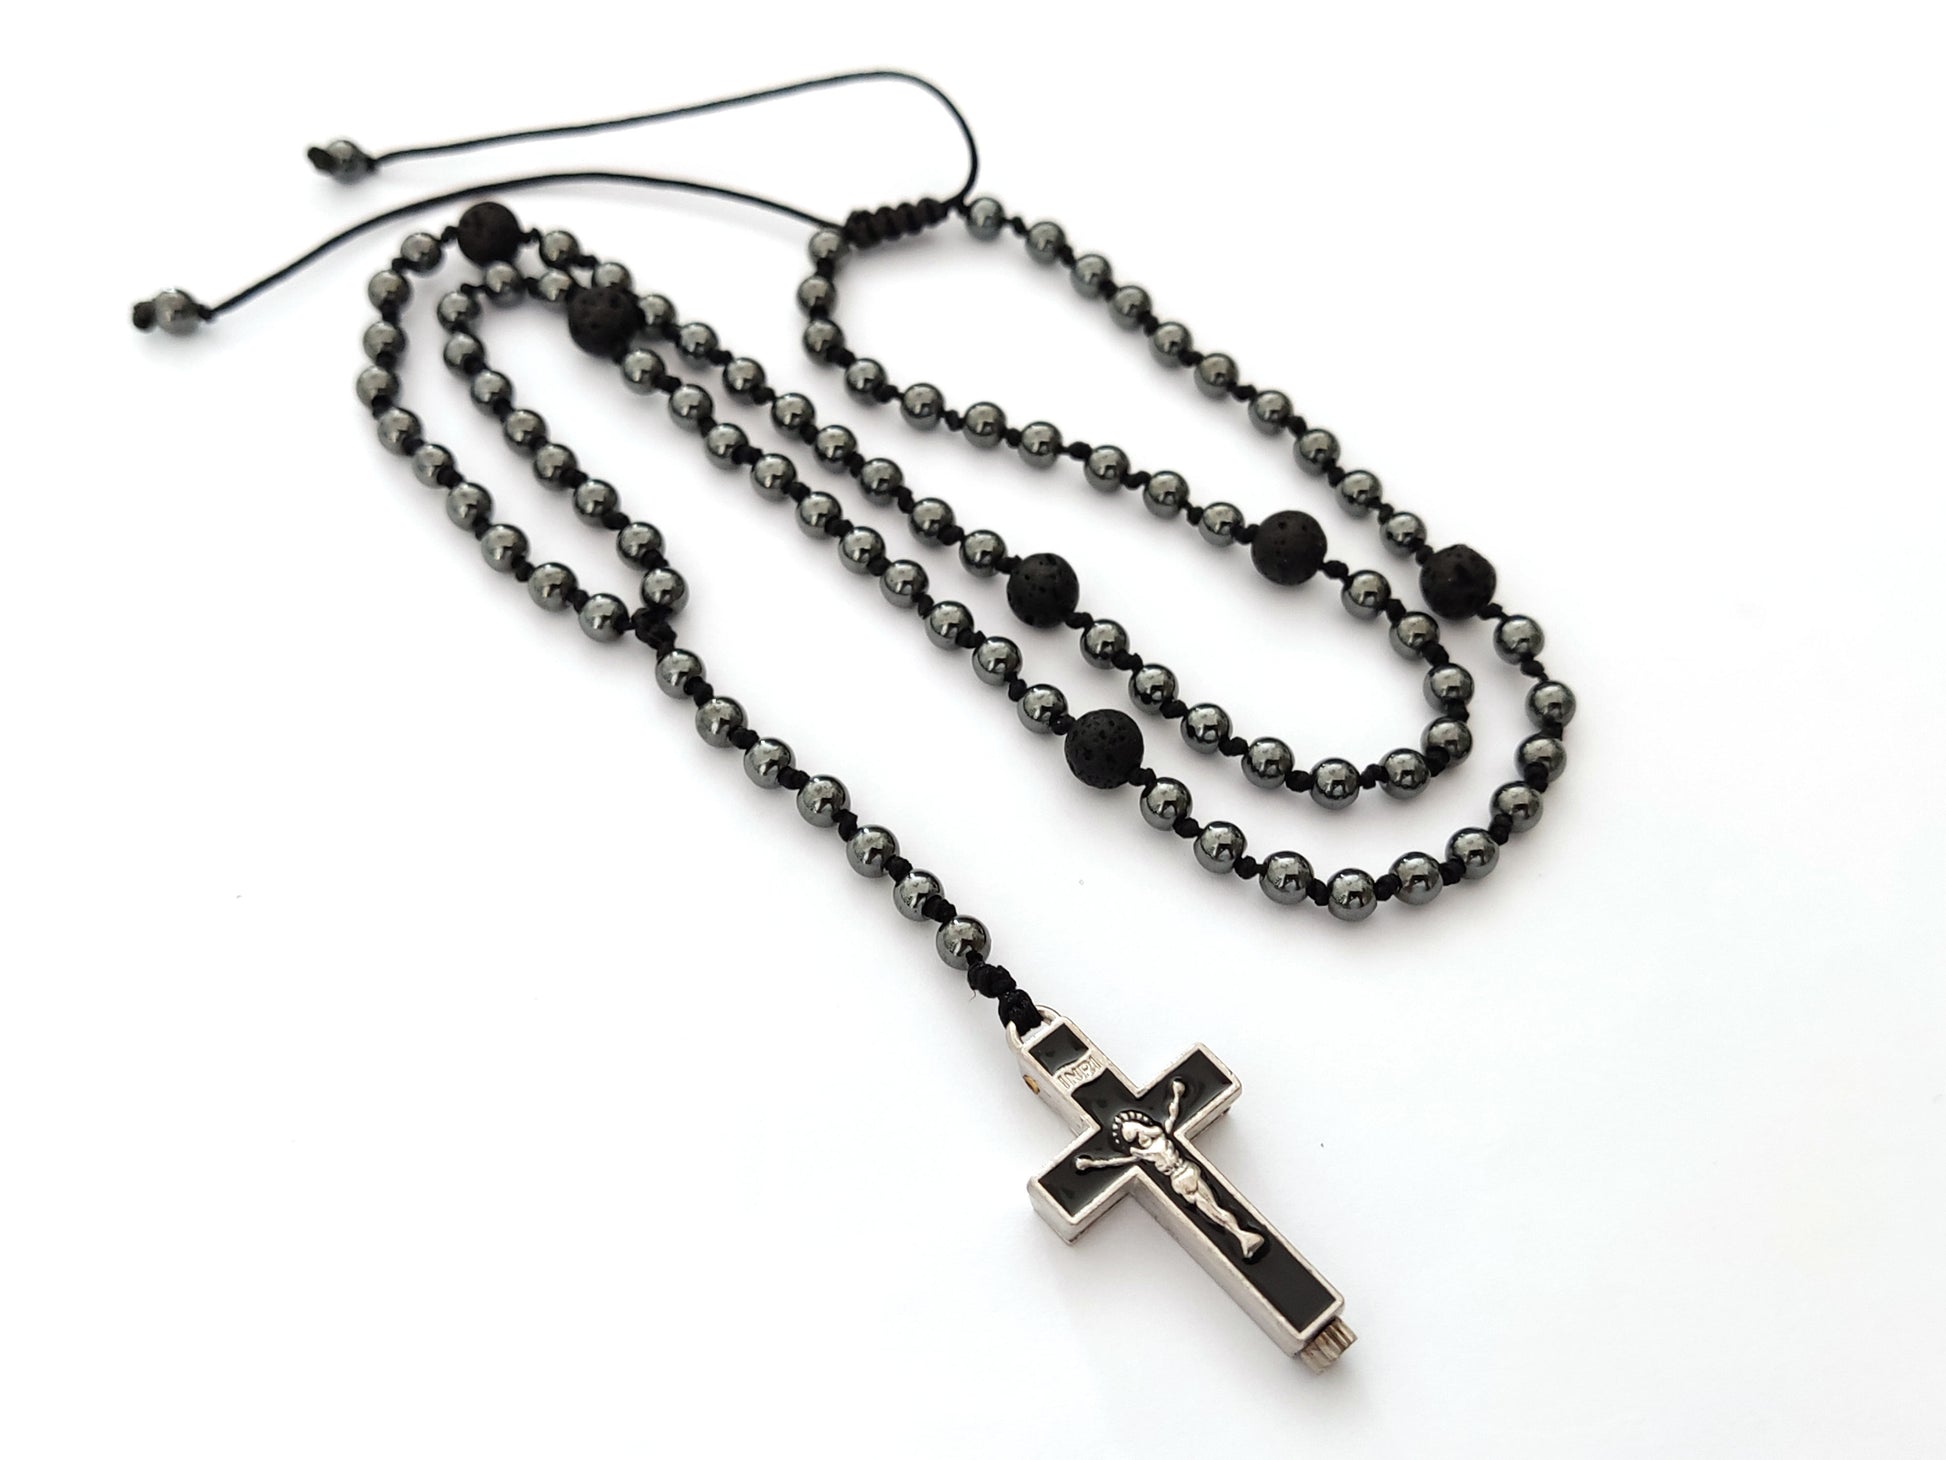 Rosary necklace made of natural hematite stones and stainless steel cross.